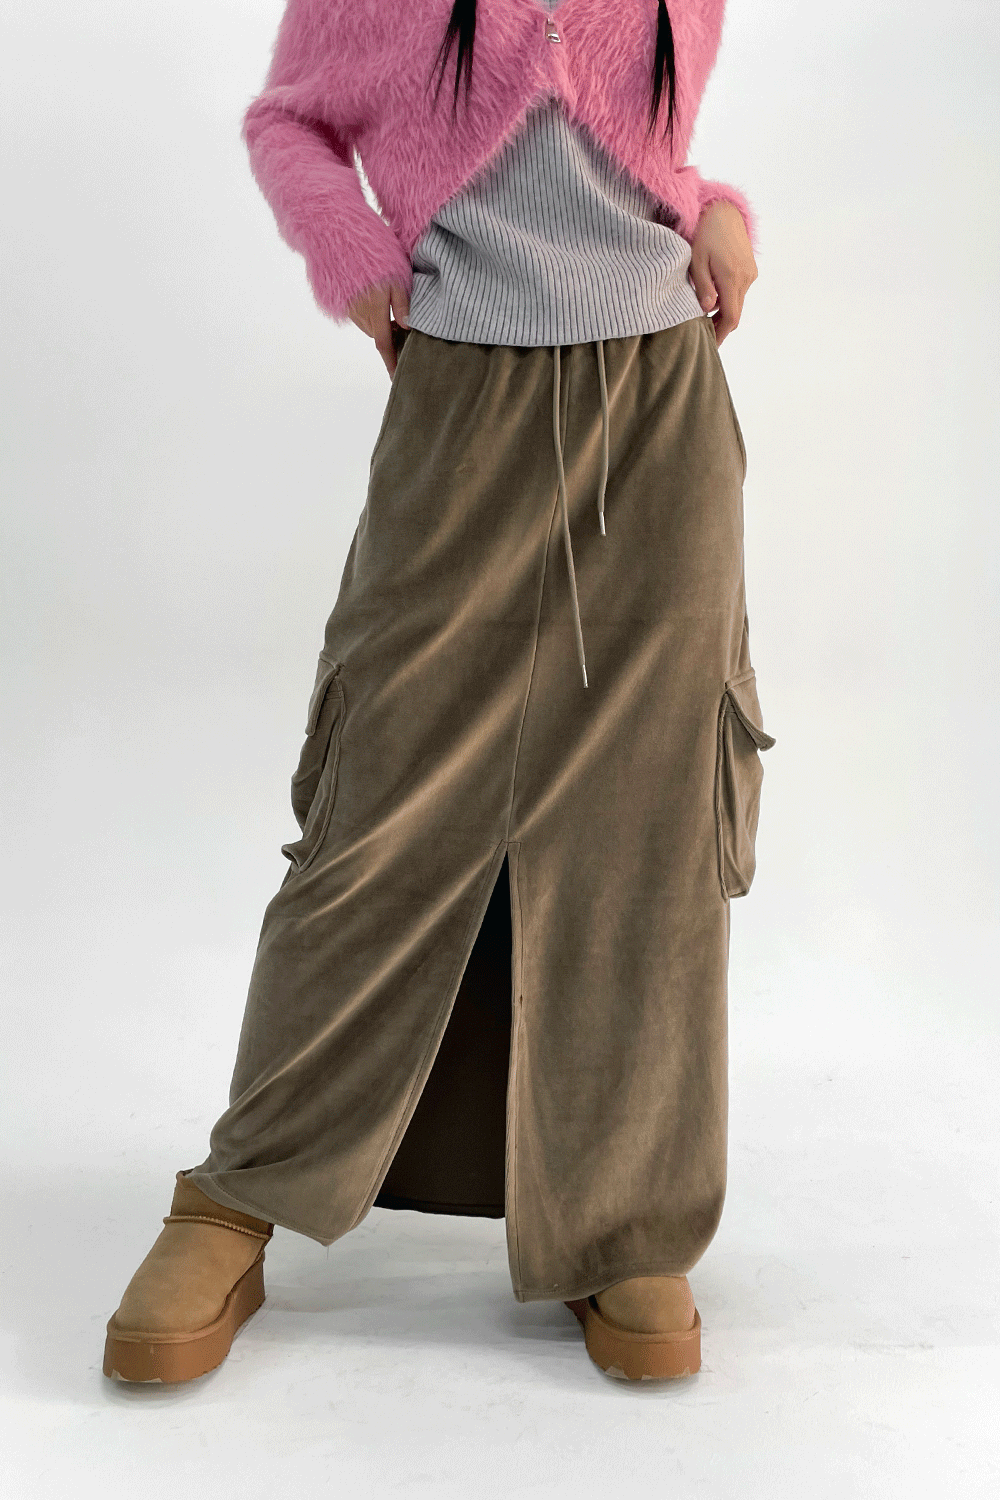 velour long cargo skirts (2colors)